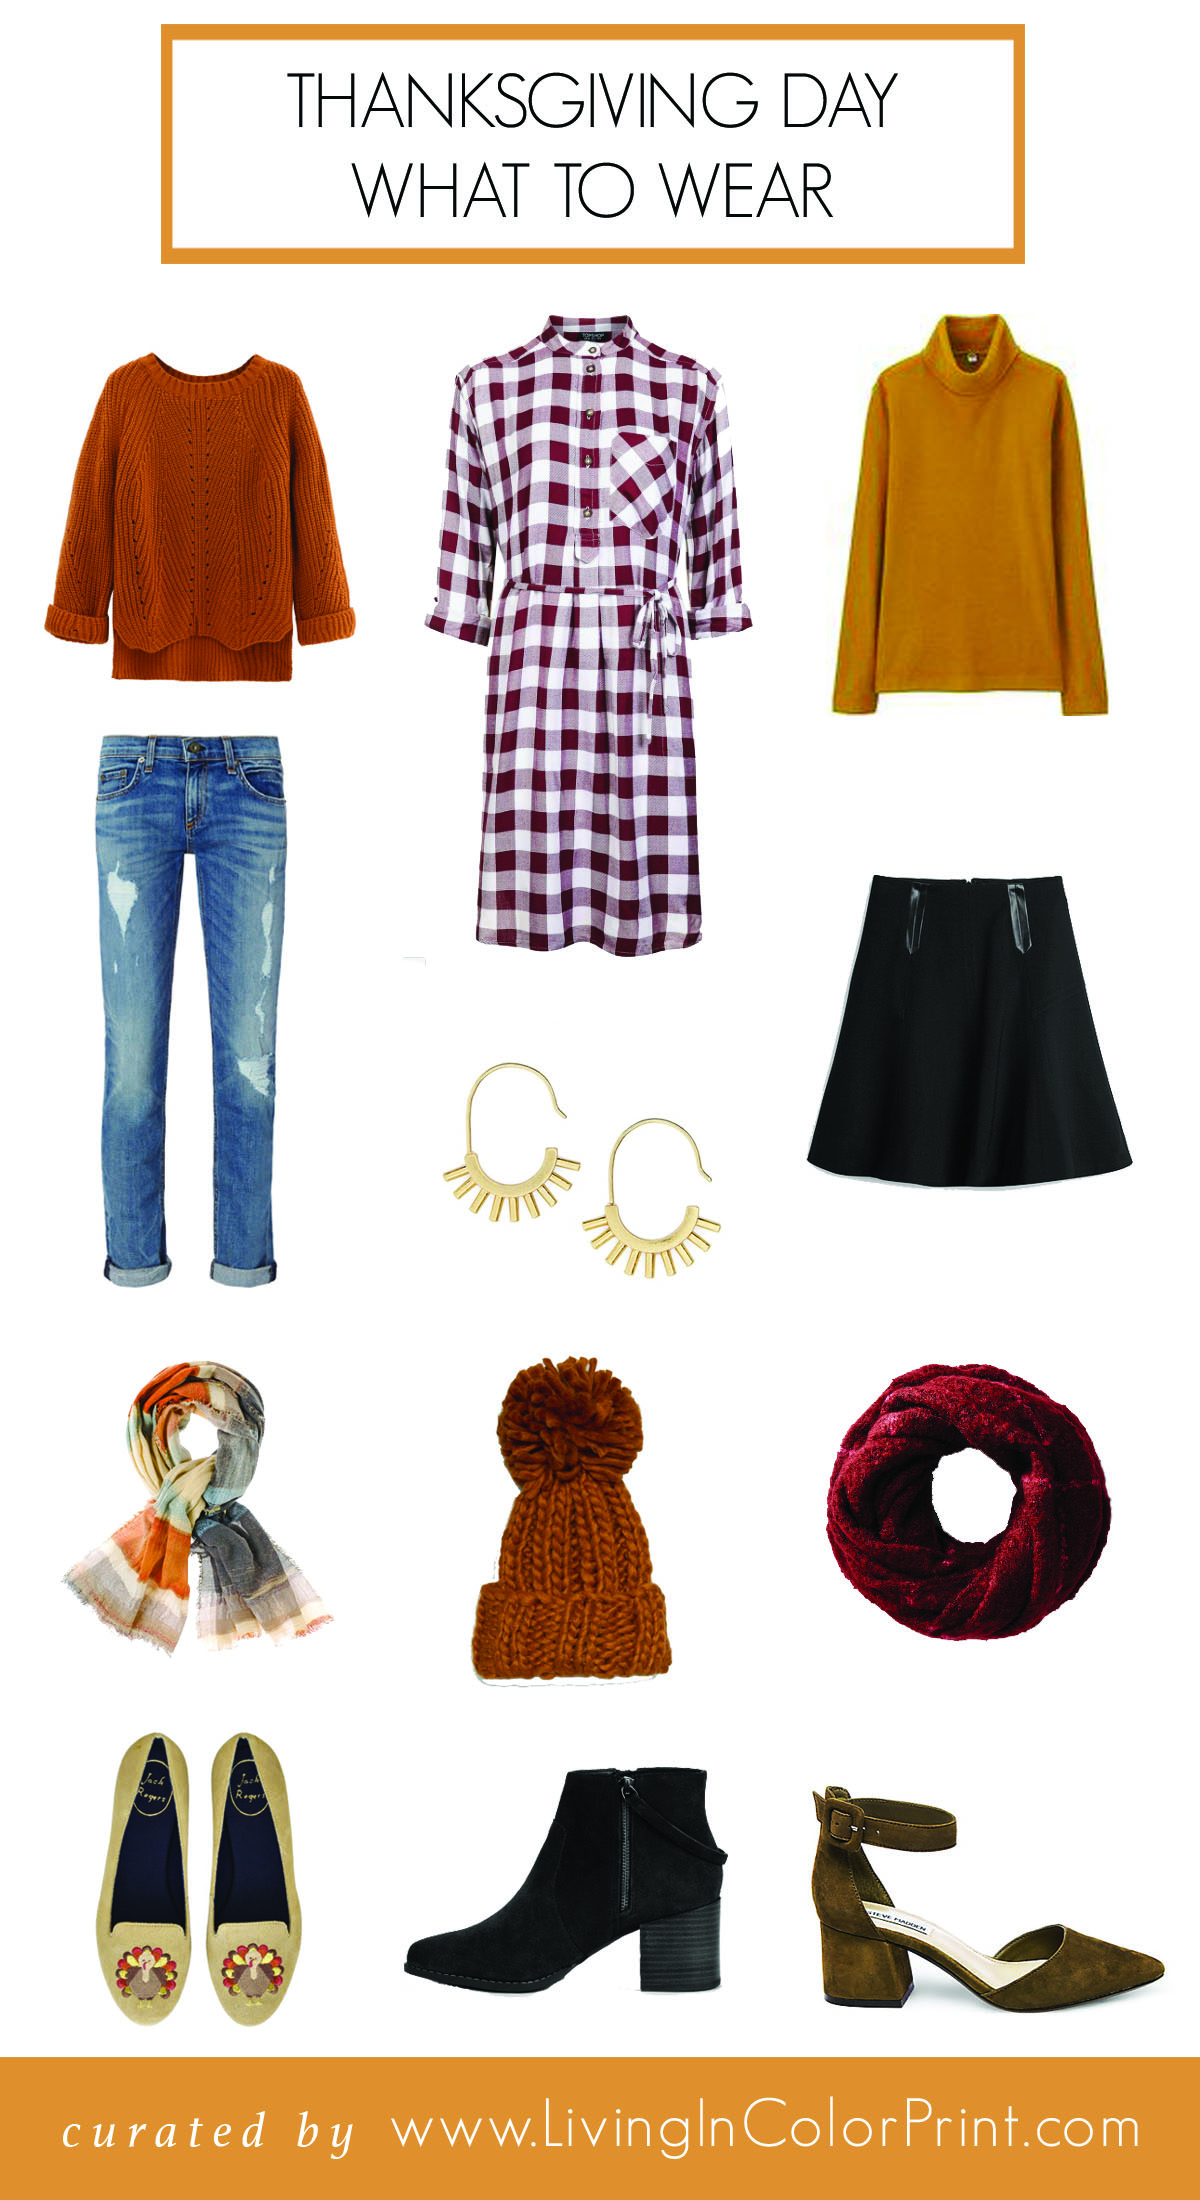 What to Wear on Thanksgiving